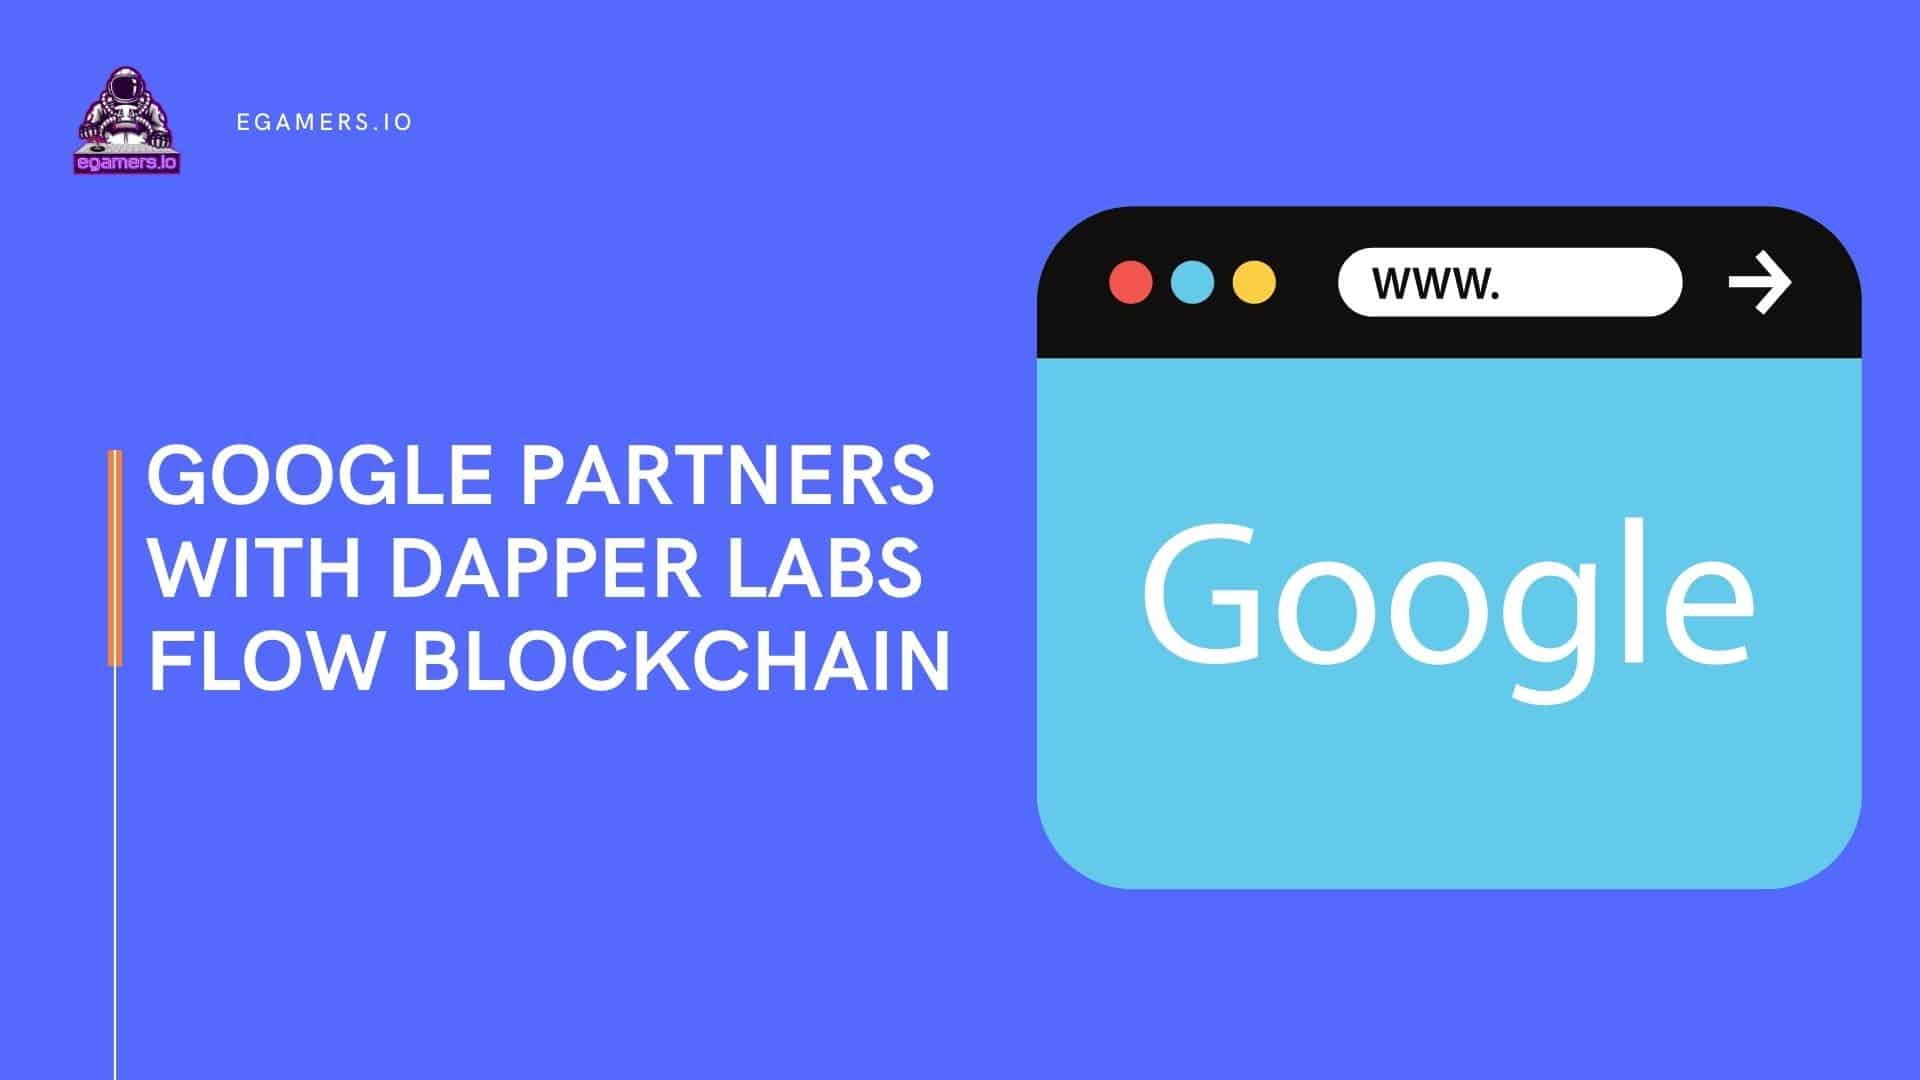 Google Sets Eyes on the Future with Dapper Lab Partnership